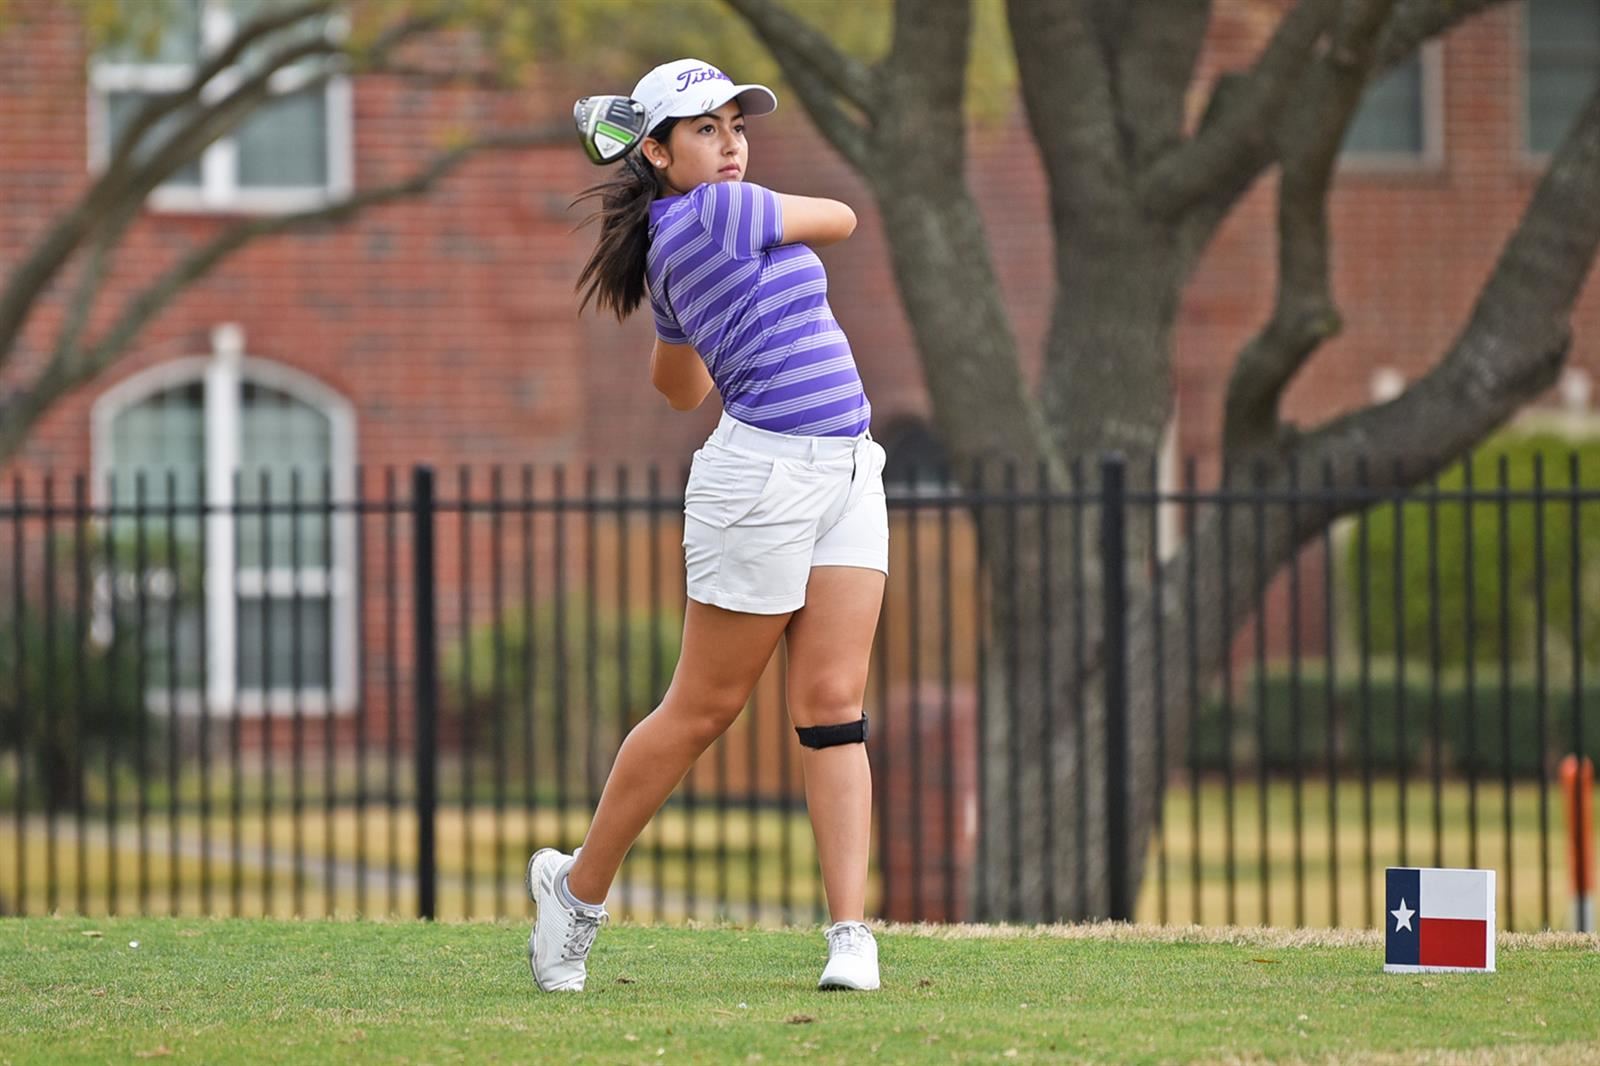 Jersey Village freshman Daniela Palmeros shot a two-round total of 142 to win the 17-6A girls’ golf title.